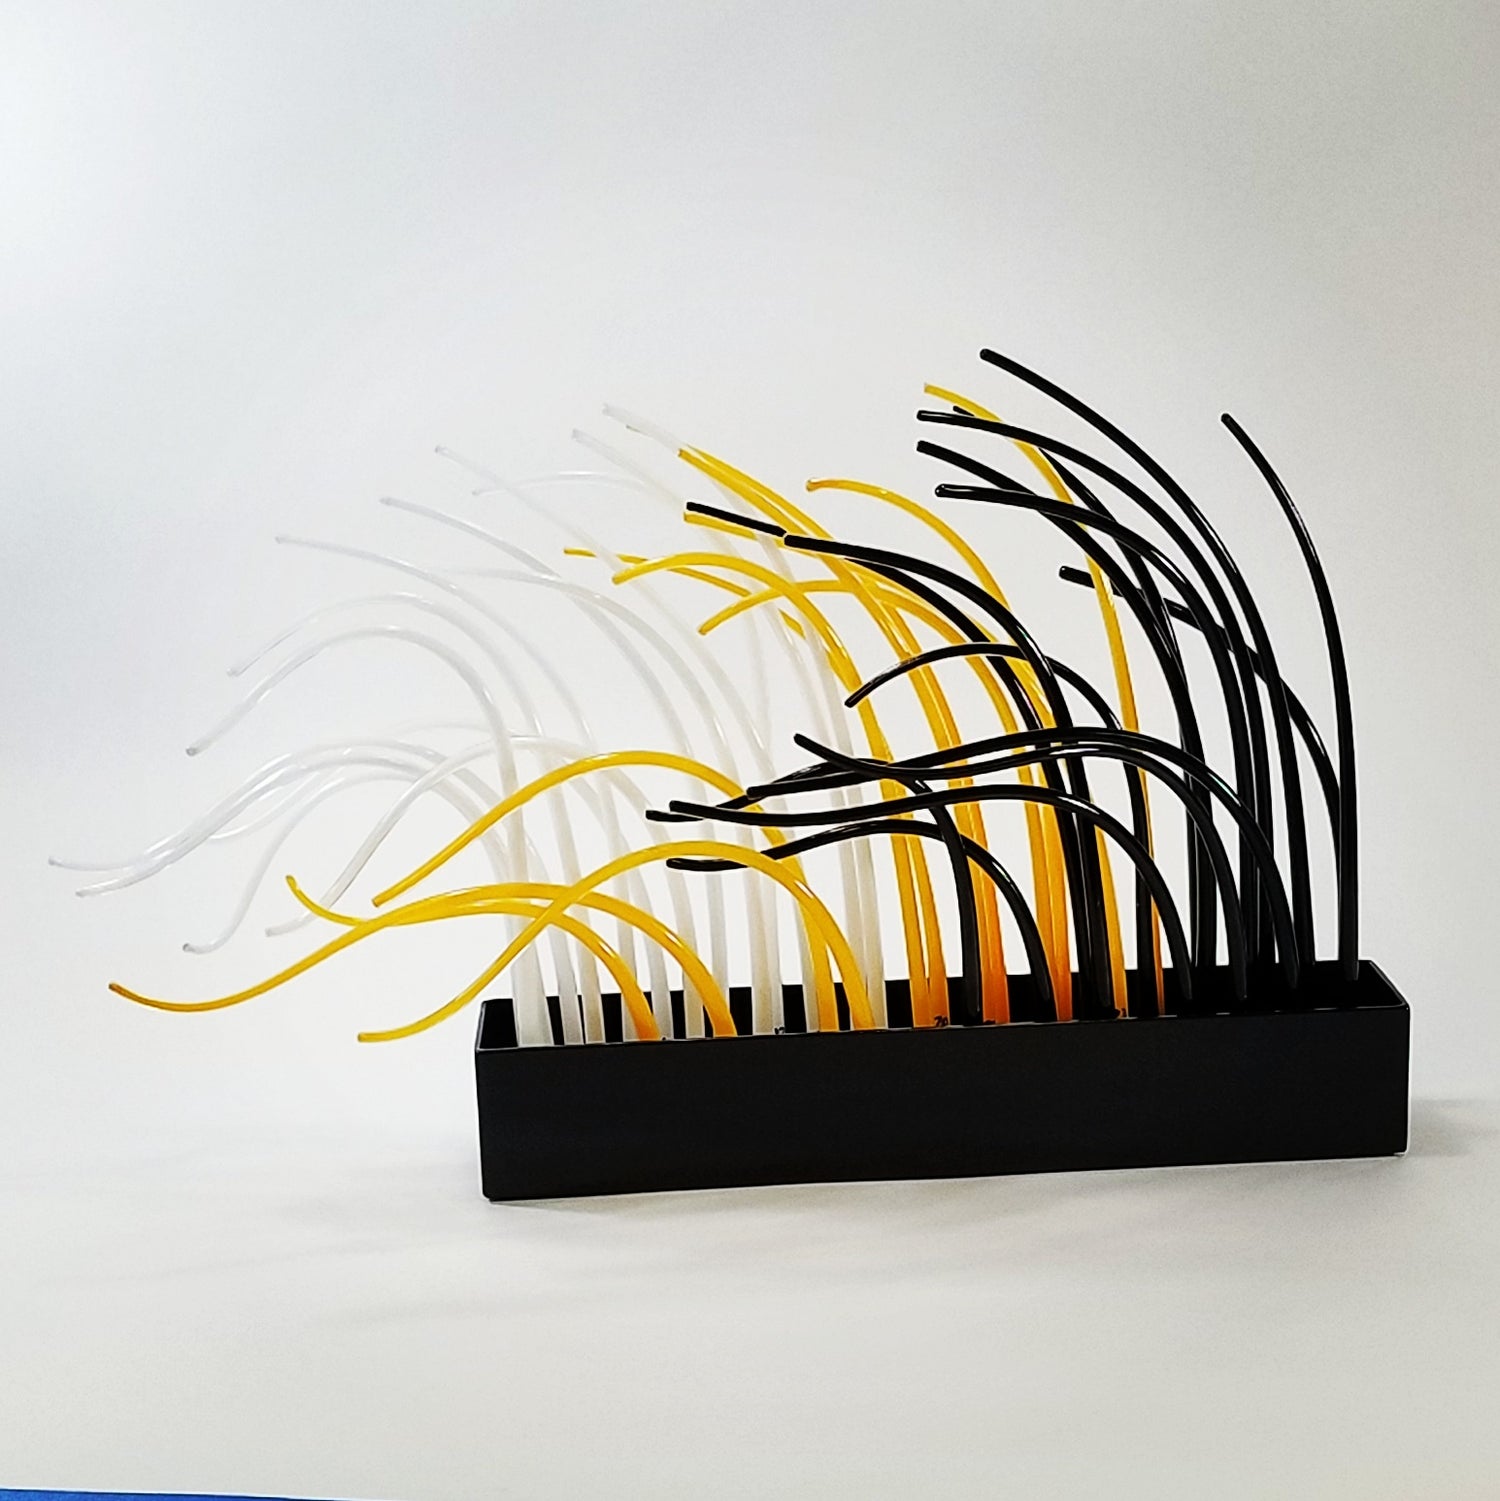 A glass sculpture with colorful tendrils sits on a white background